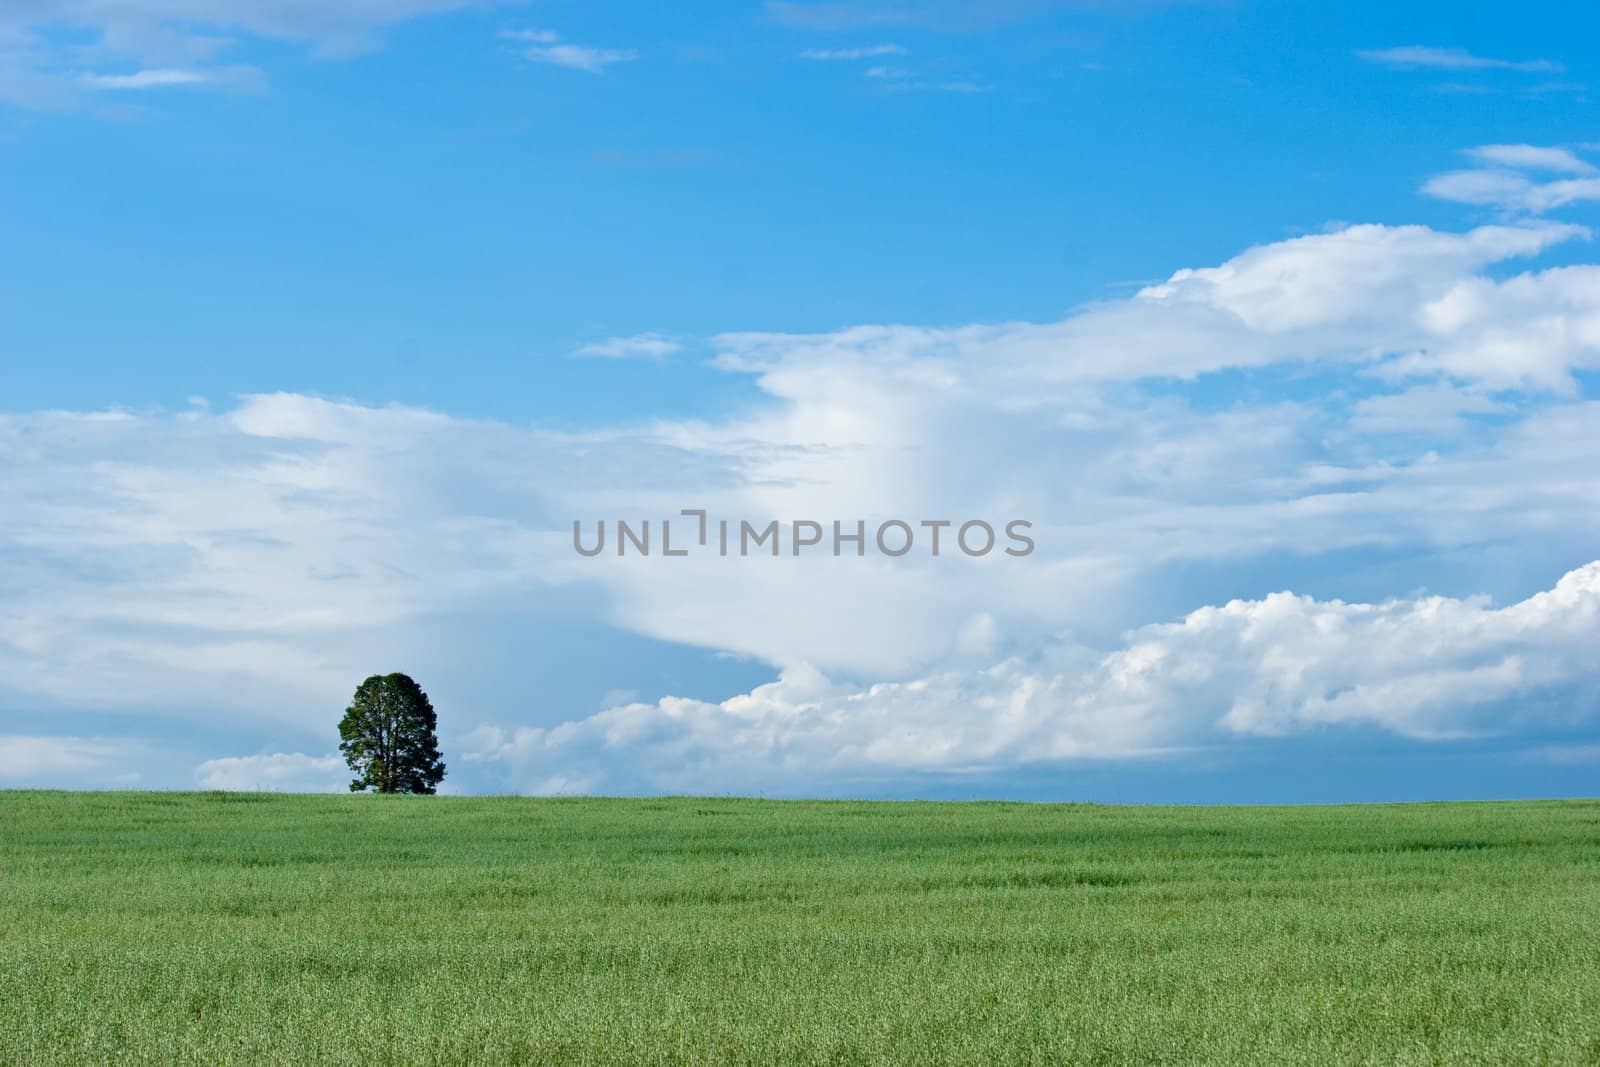 The lonely tree by naumoid